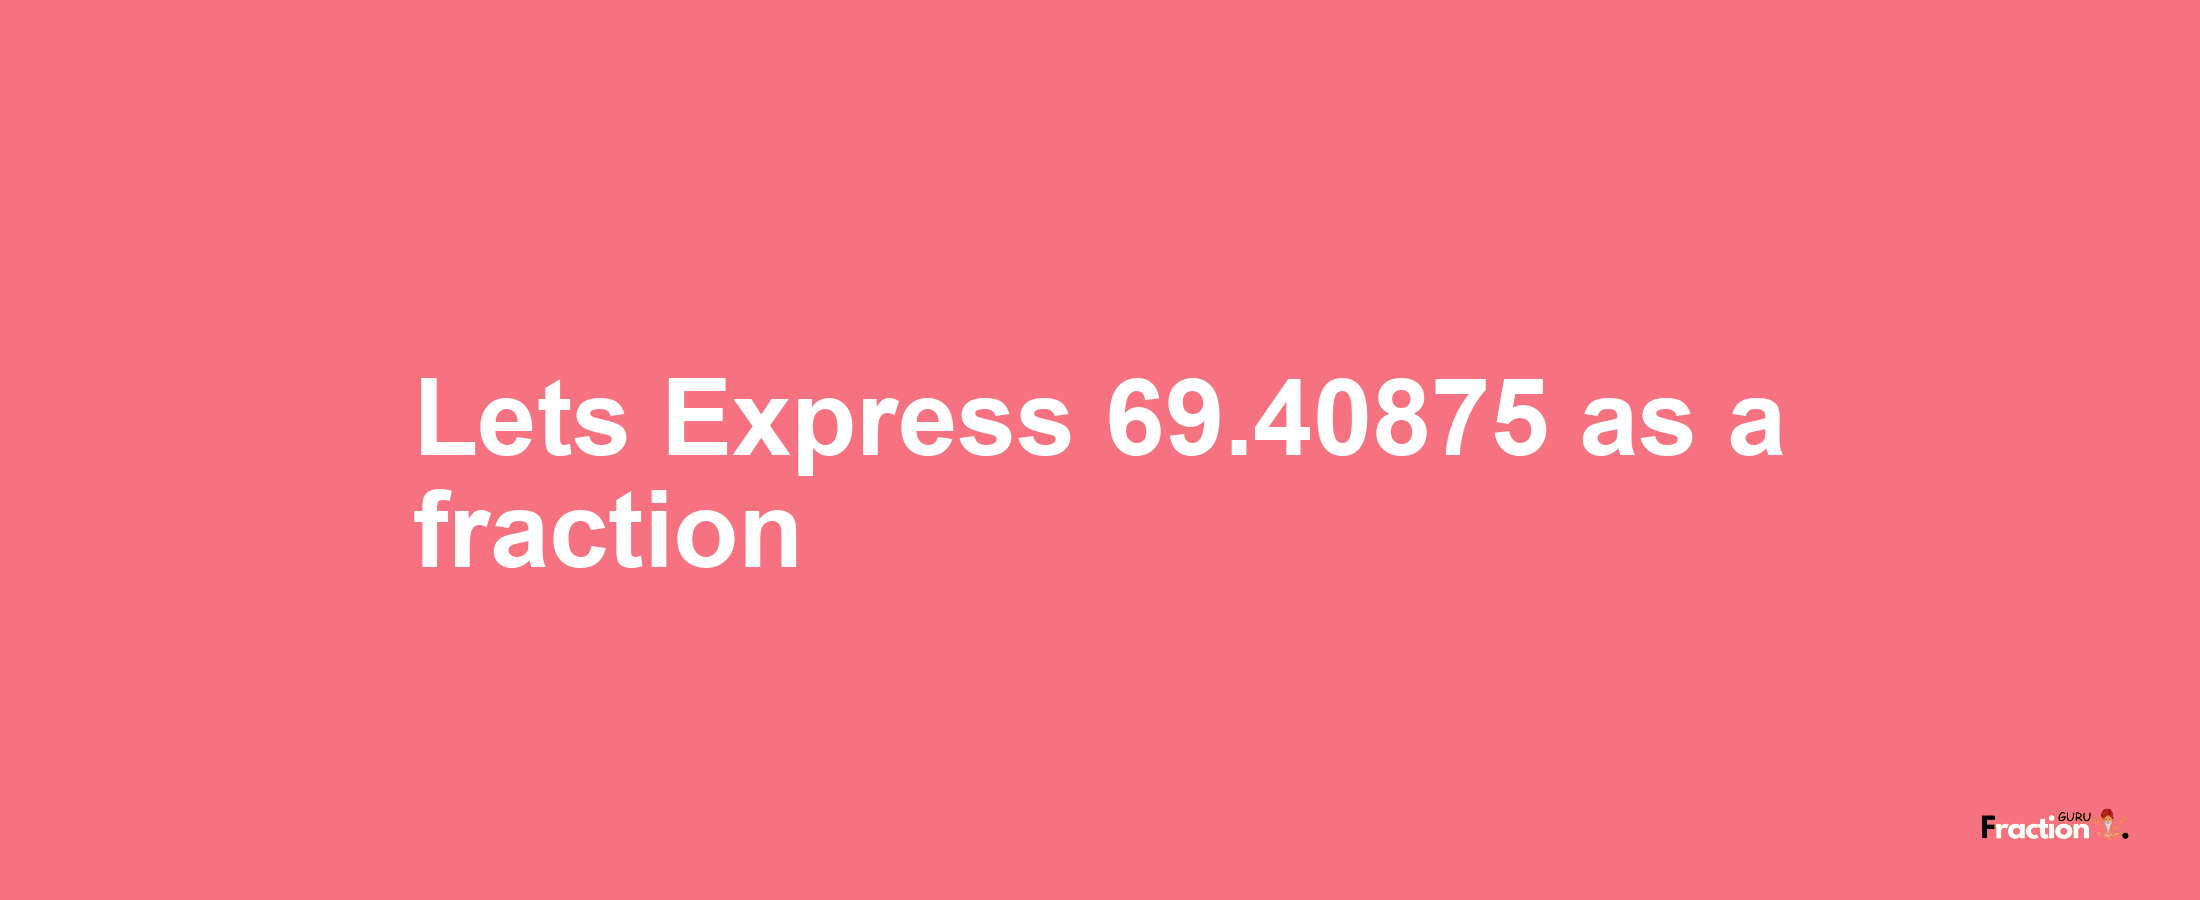 Lets Express 69.40875 as afraction